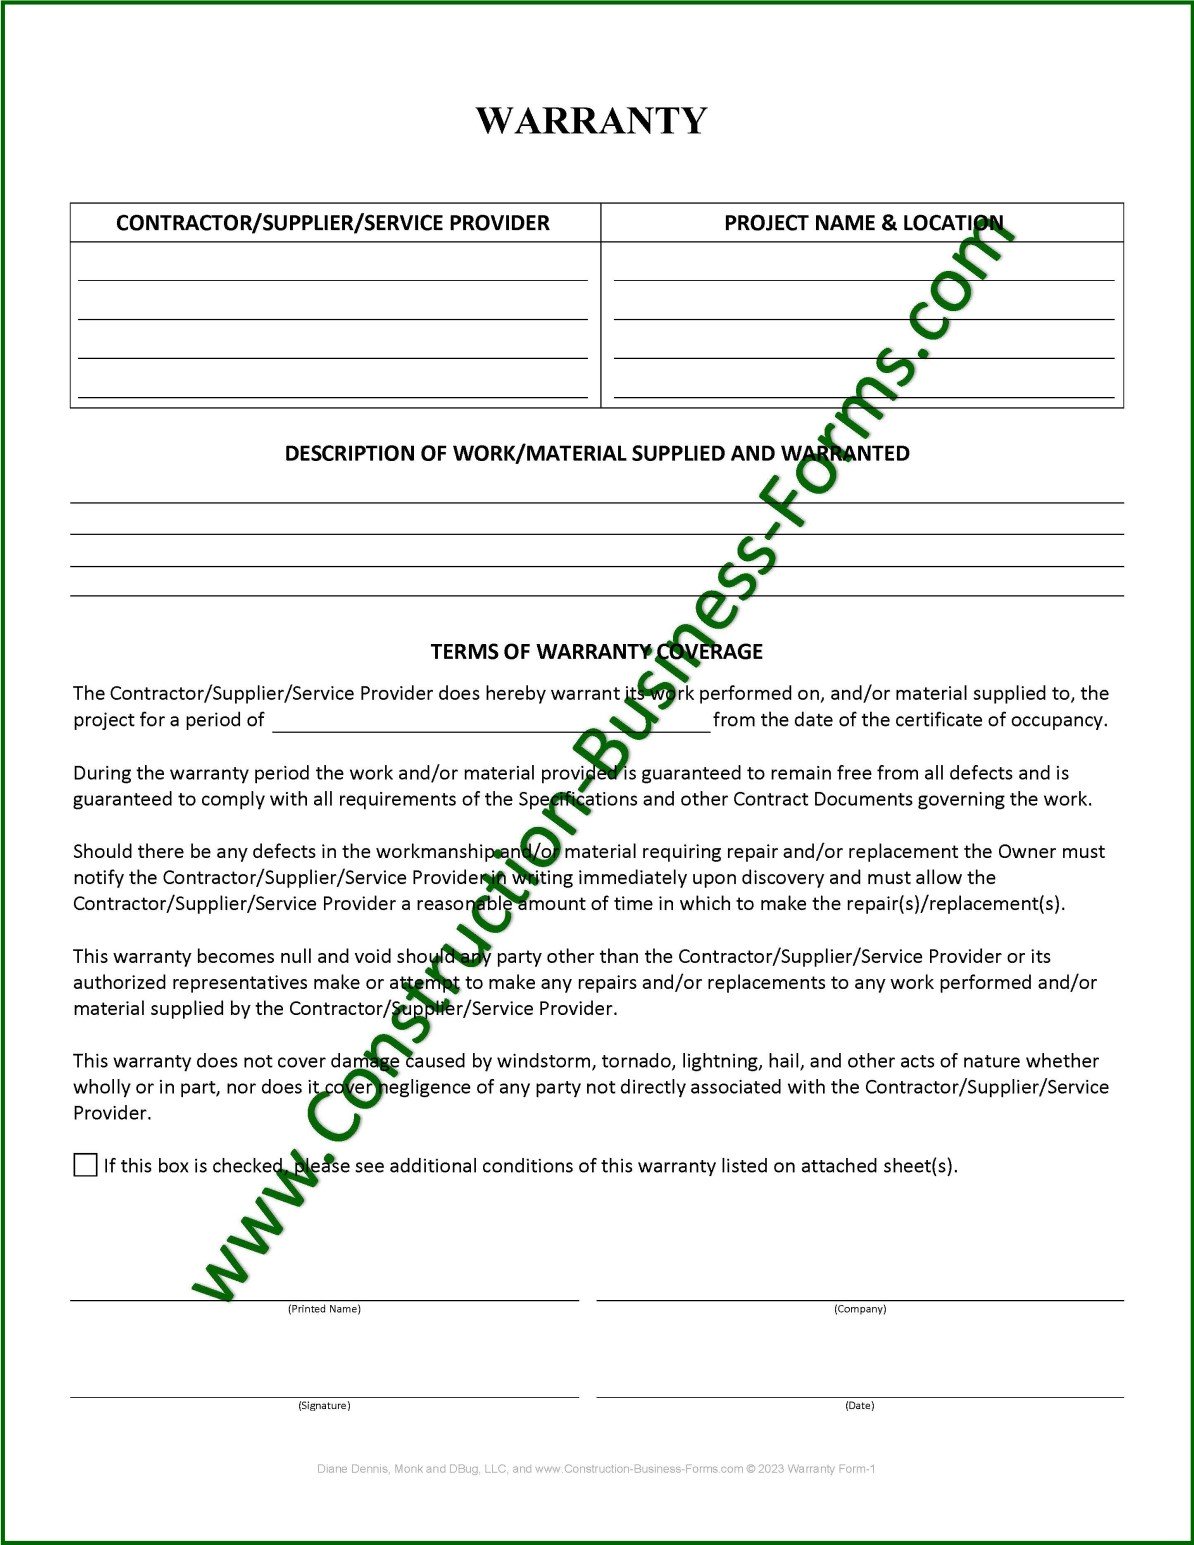 Image of Construction Warranty Form